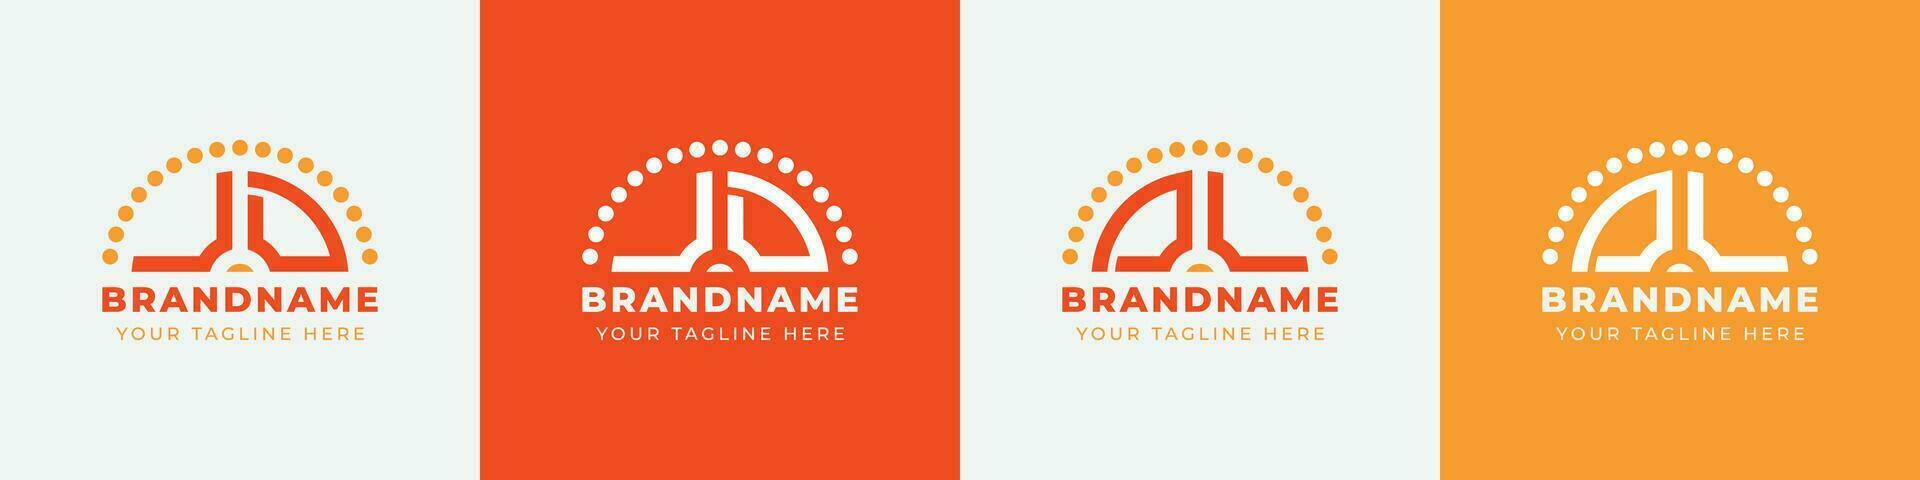 Letter DU and UD or DV and VD Sunrise  Logo Set, suitable for any business with DU, UD, DV, VD initials. vector